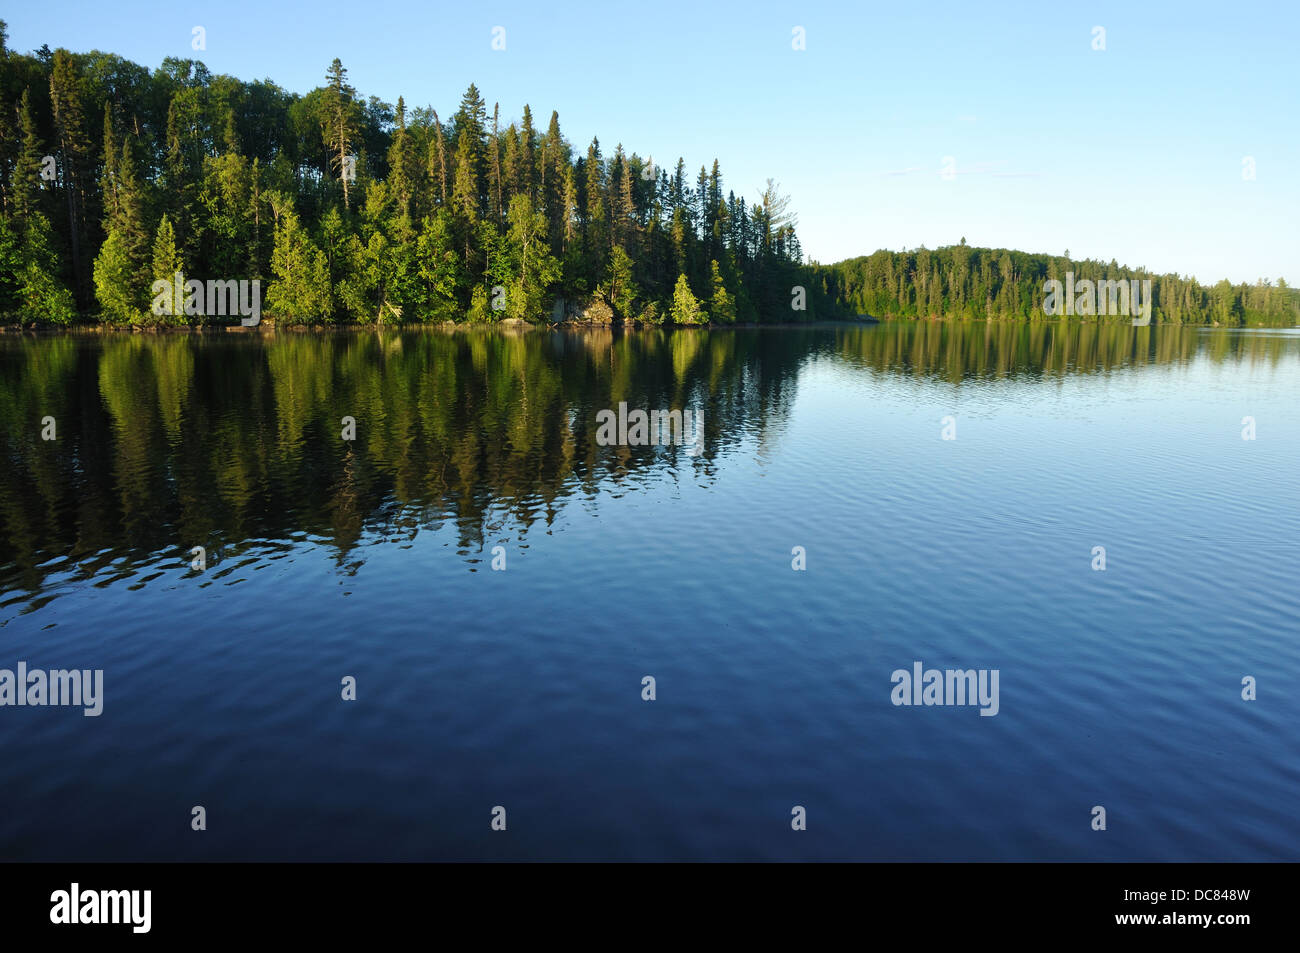 Lake and forest in Boundary Waters Canoe Area Wilderness, Superior National Forest, Minnesota, USA Stock Photo